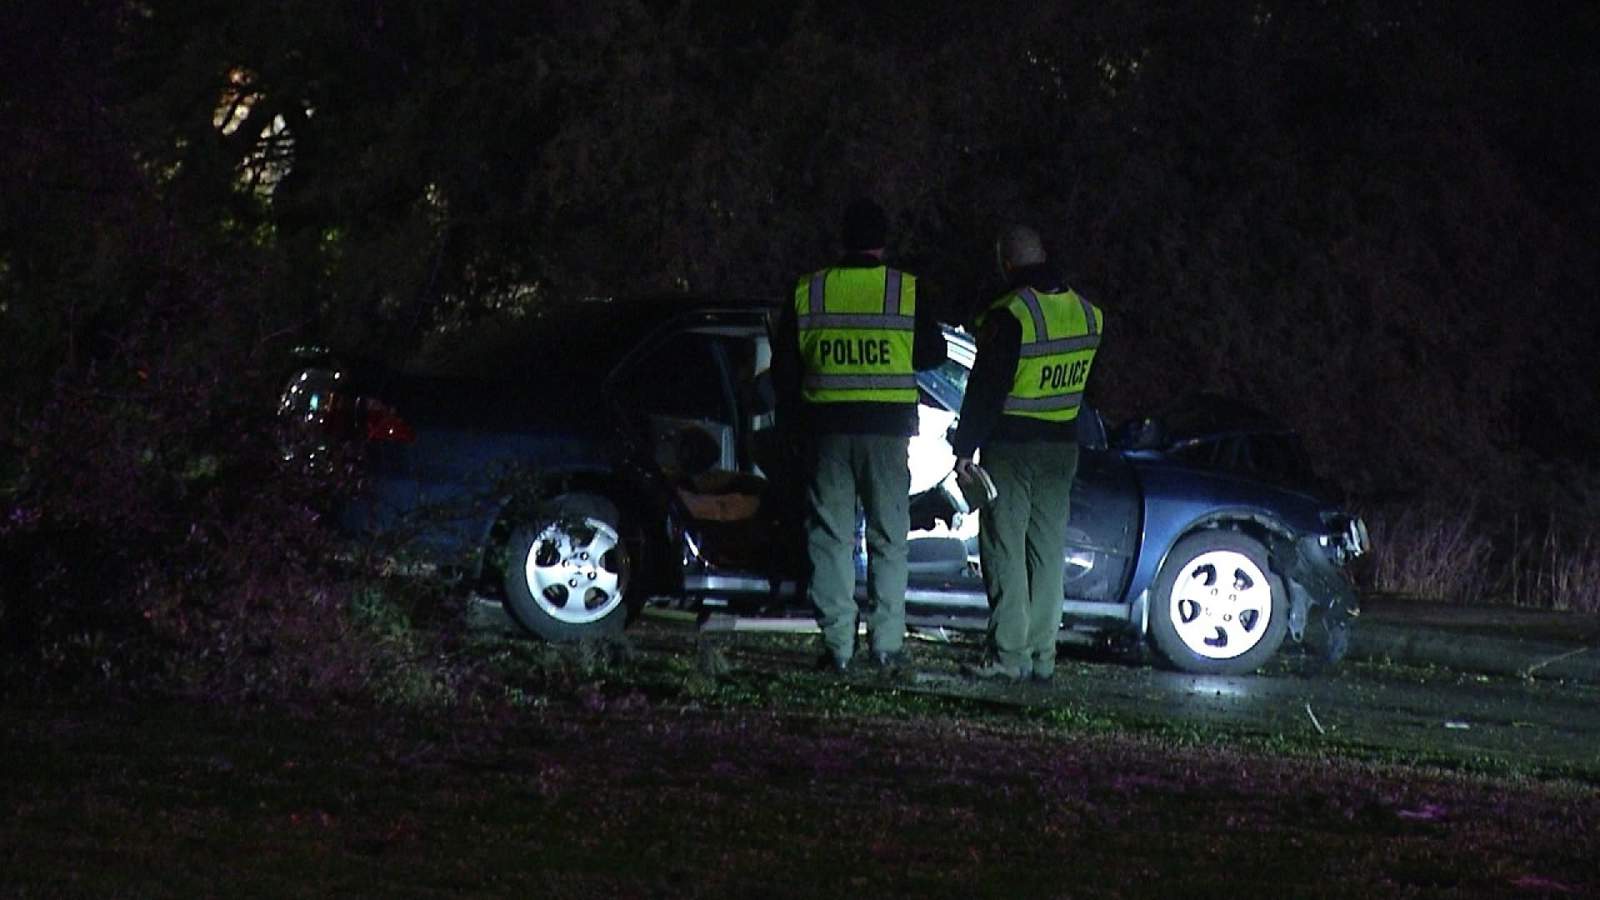 75-year-old woman killed in vehicle crash with tree, police say